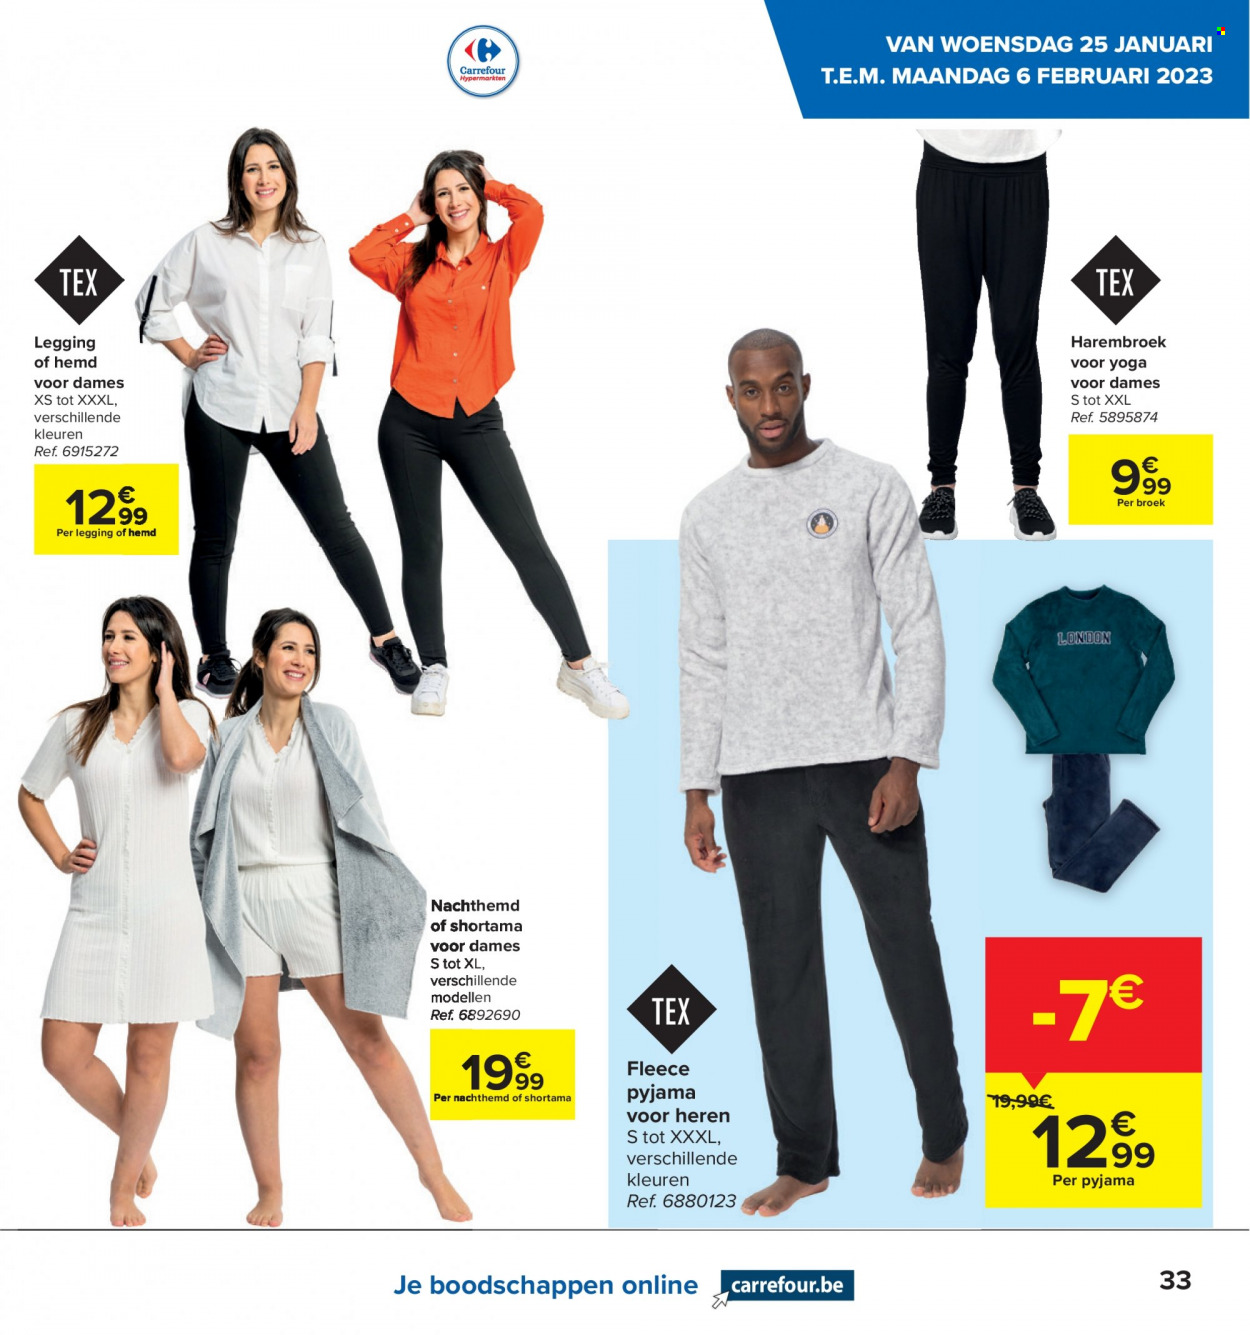 Catalogue Carrefour hypermarkt - 25.1.2023 - 6.2.2023. Page 13.